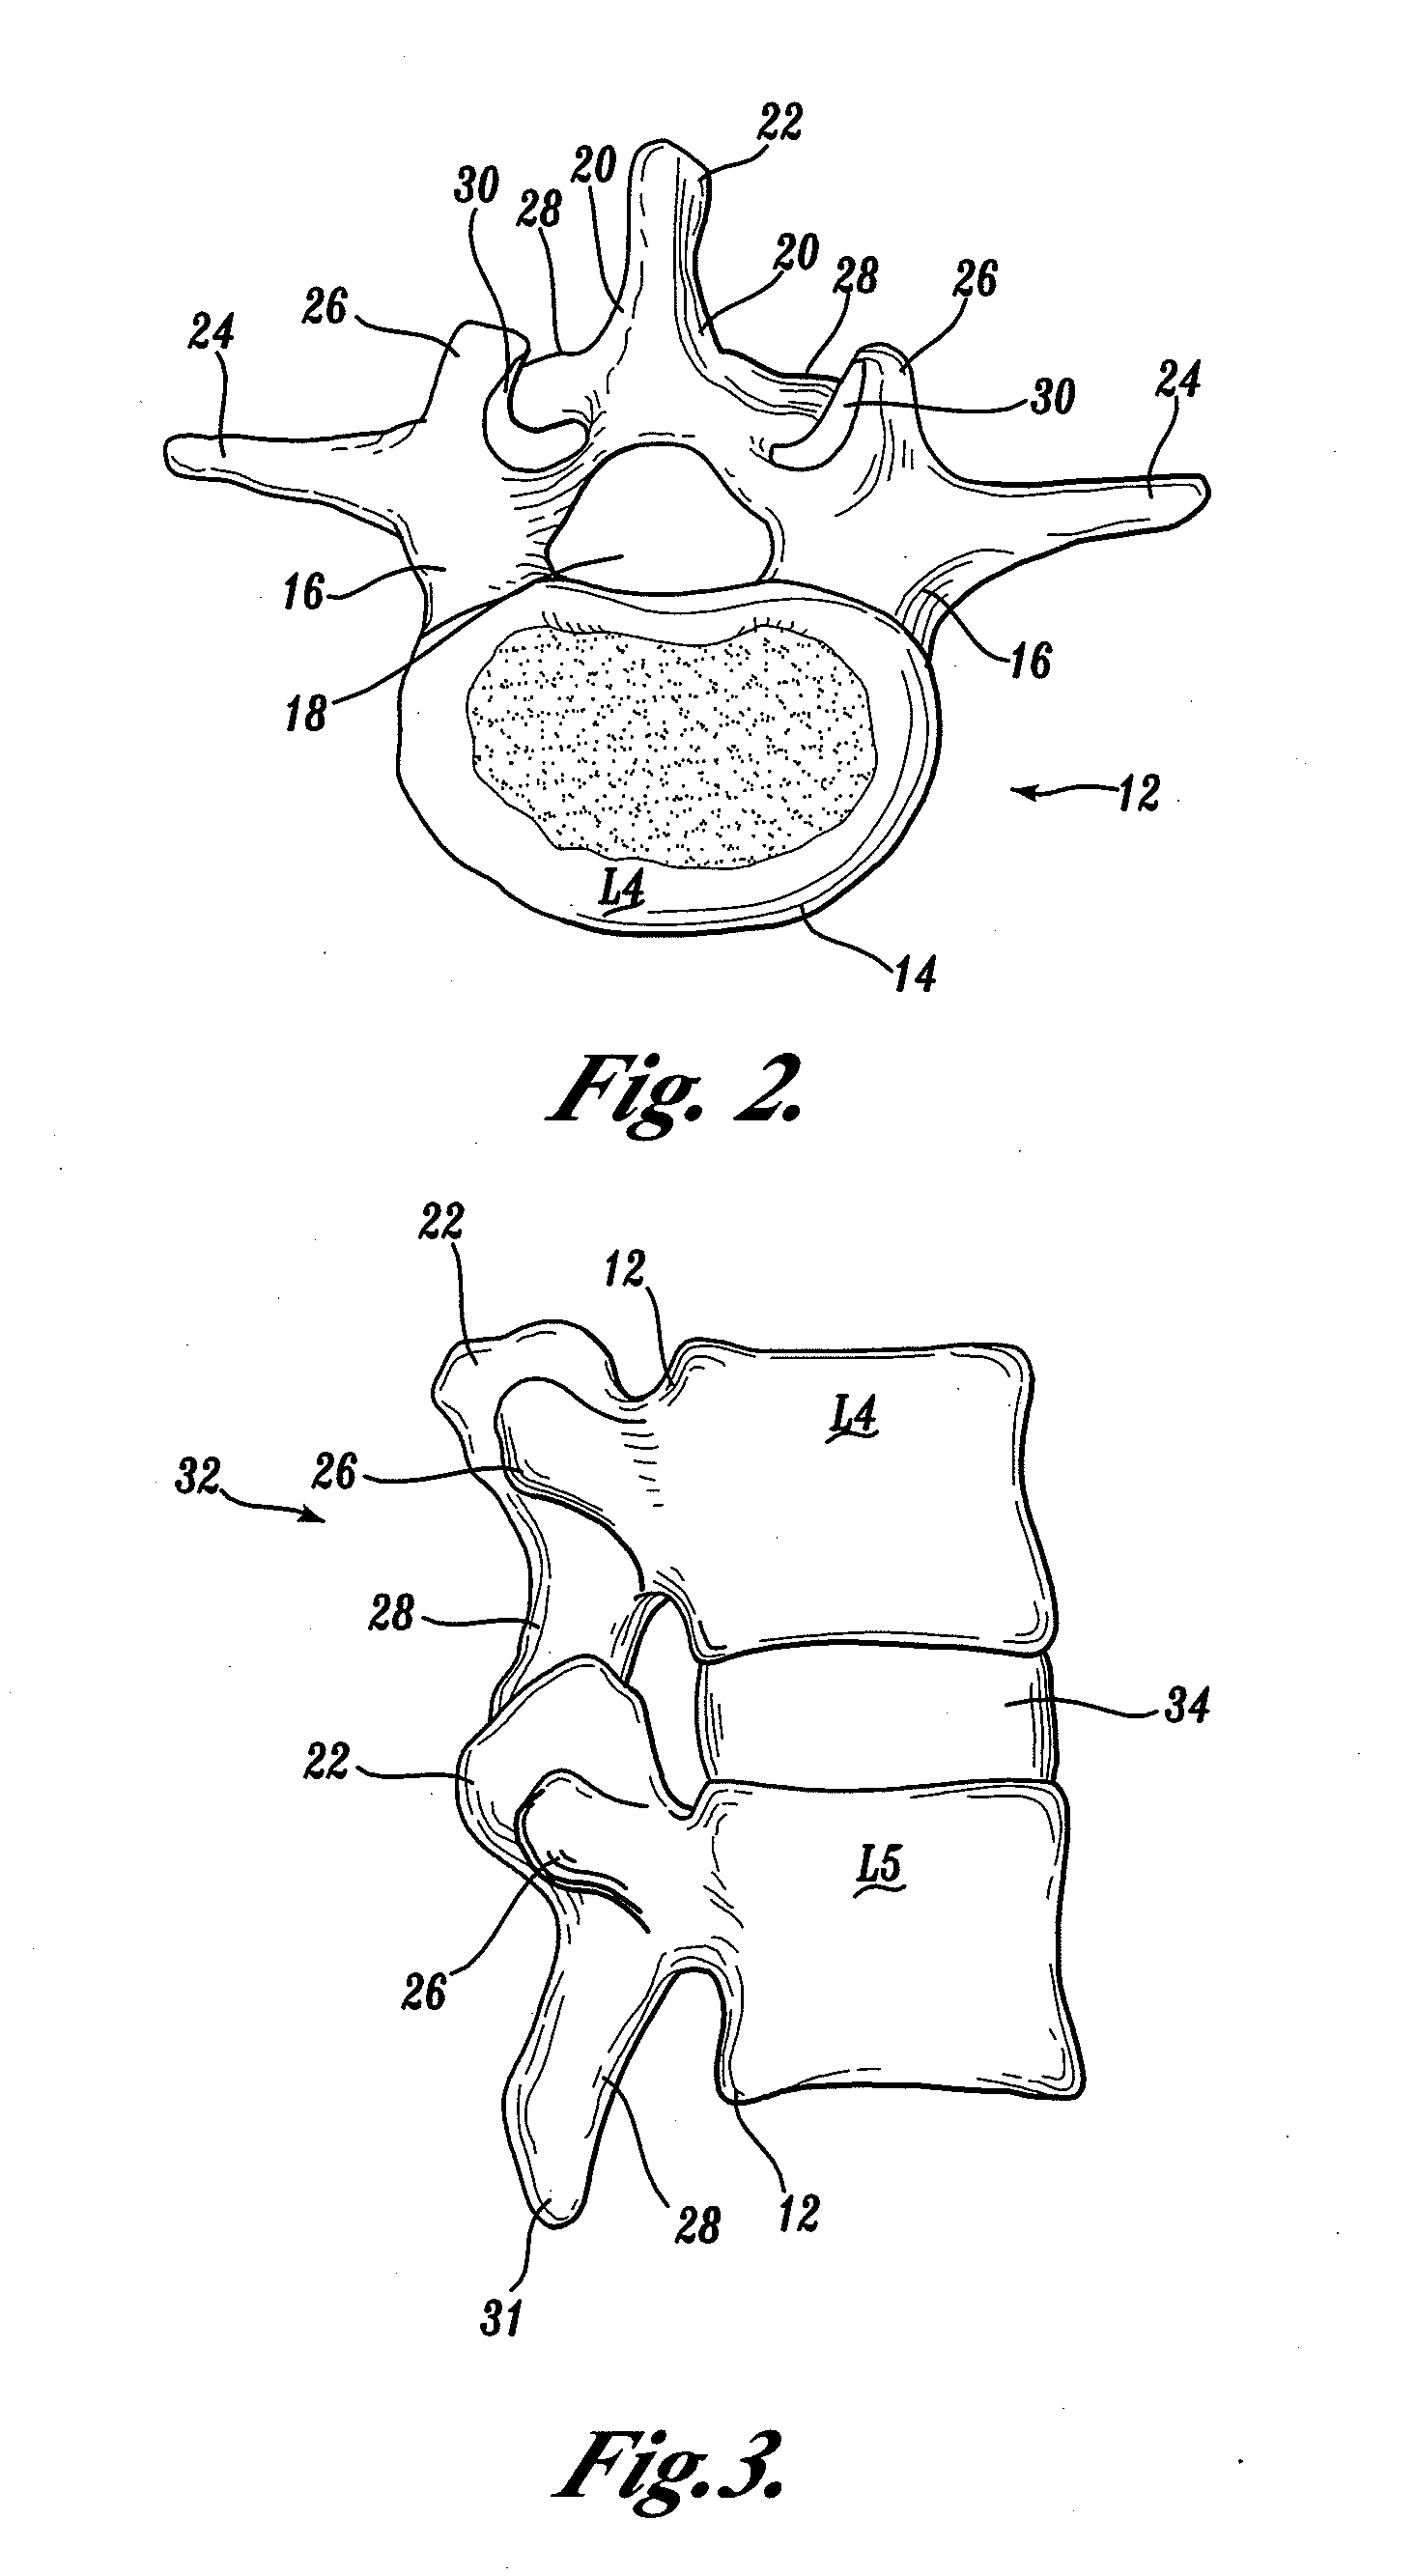 Polyaxial adjustment of facet joint prostheses